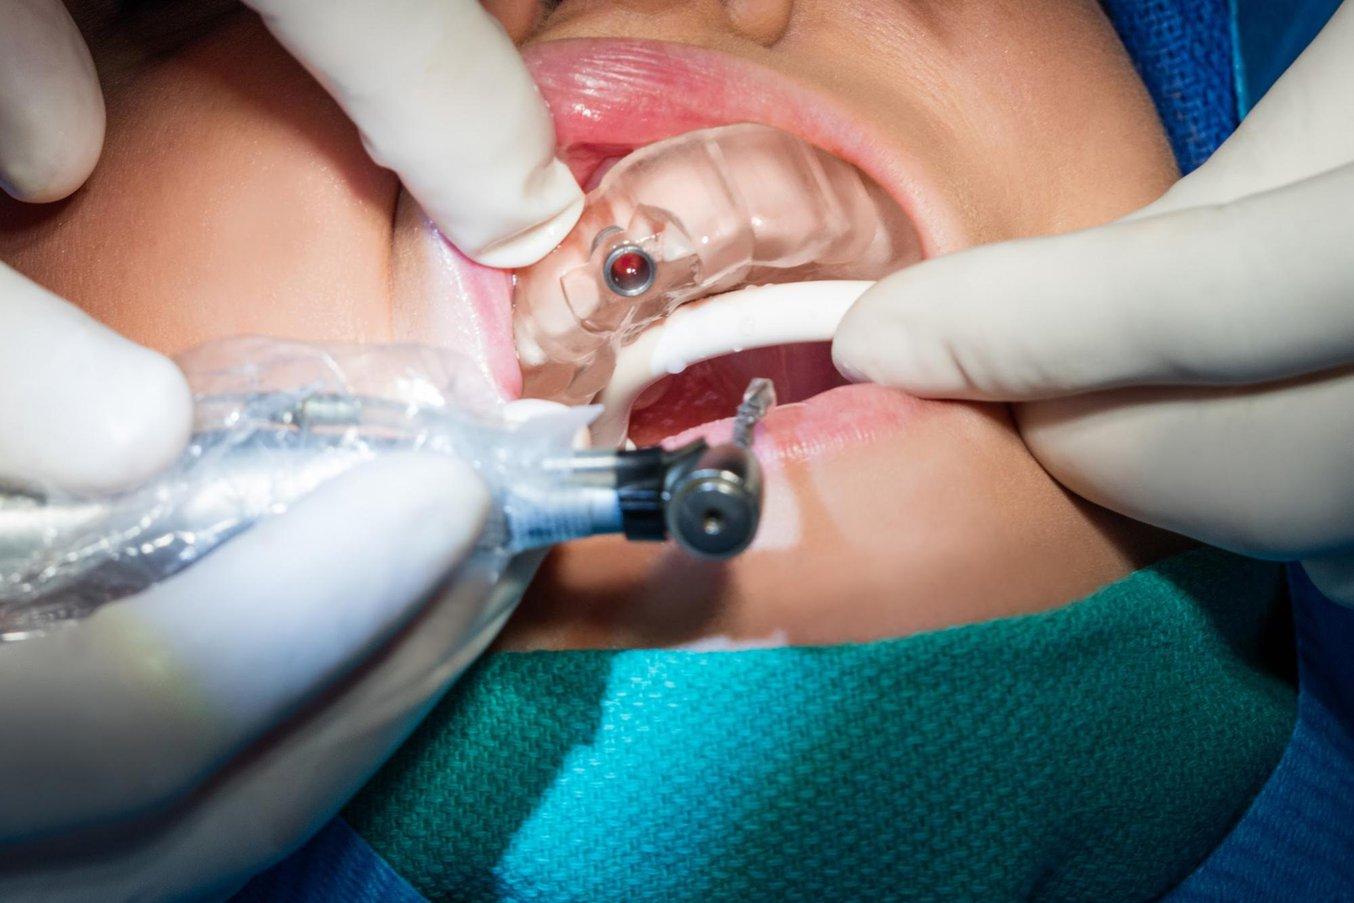 Using a surgical guide in a patient's mouth